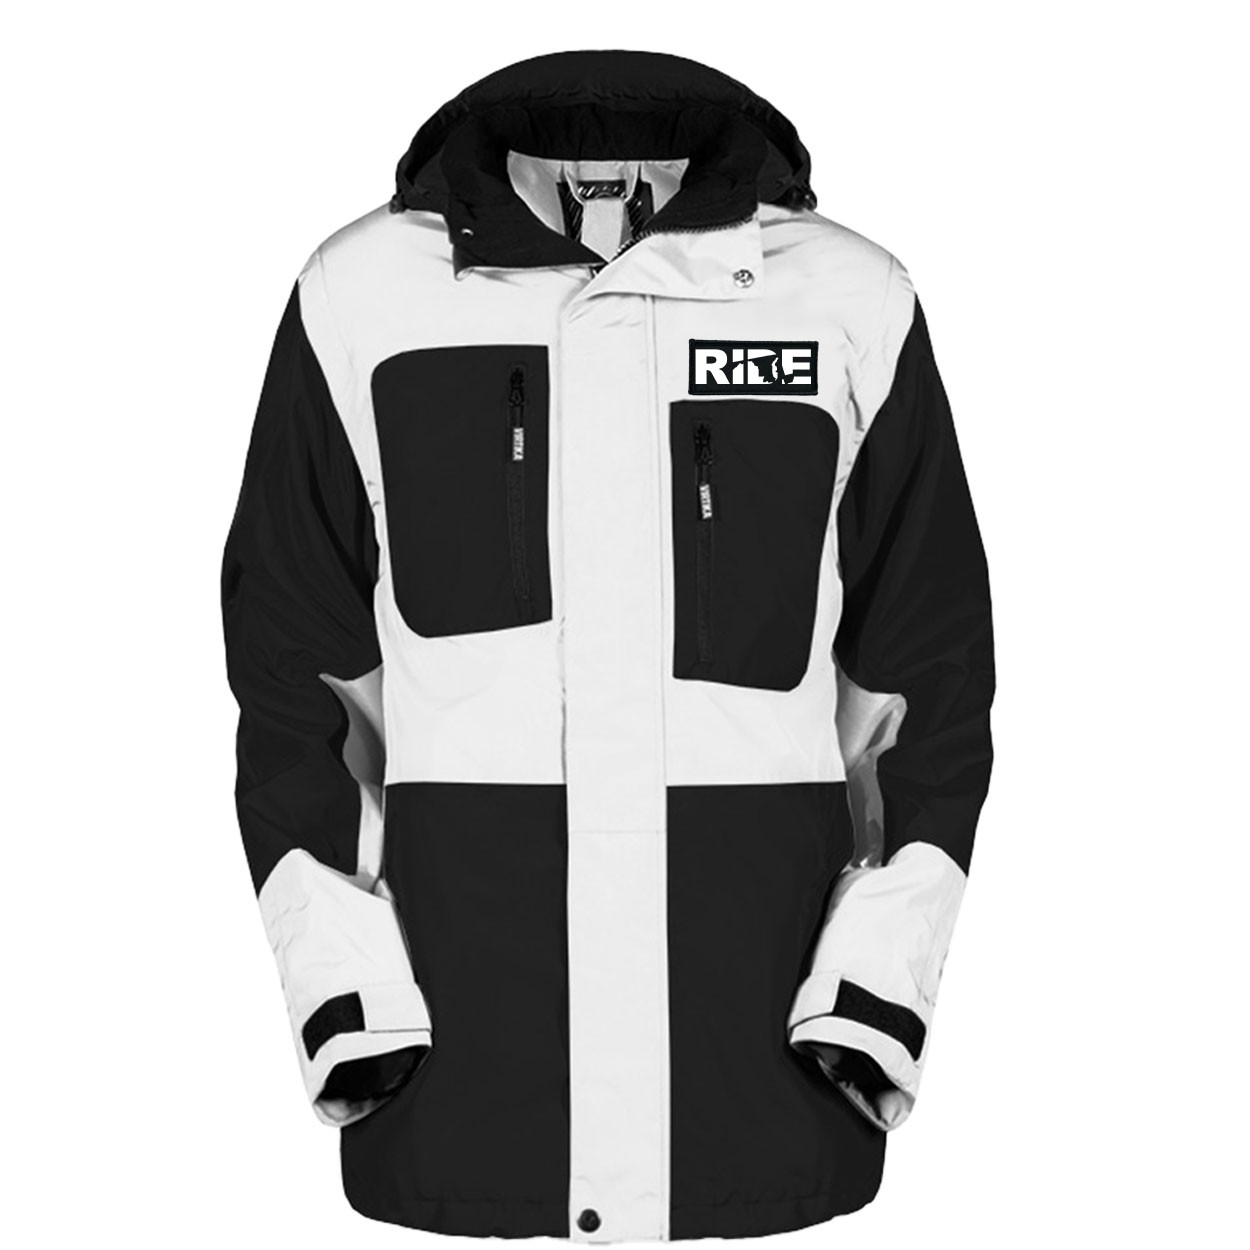 Ride Maryland Classic Woven Patch Pro Snowboard Jacket (Black/White)